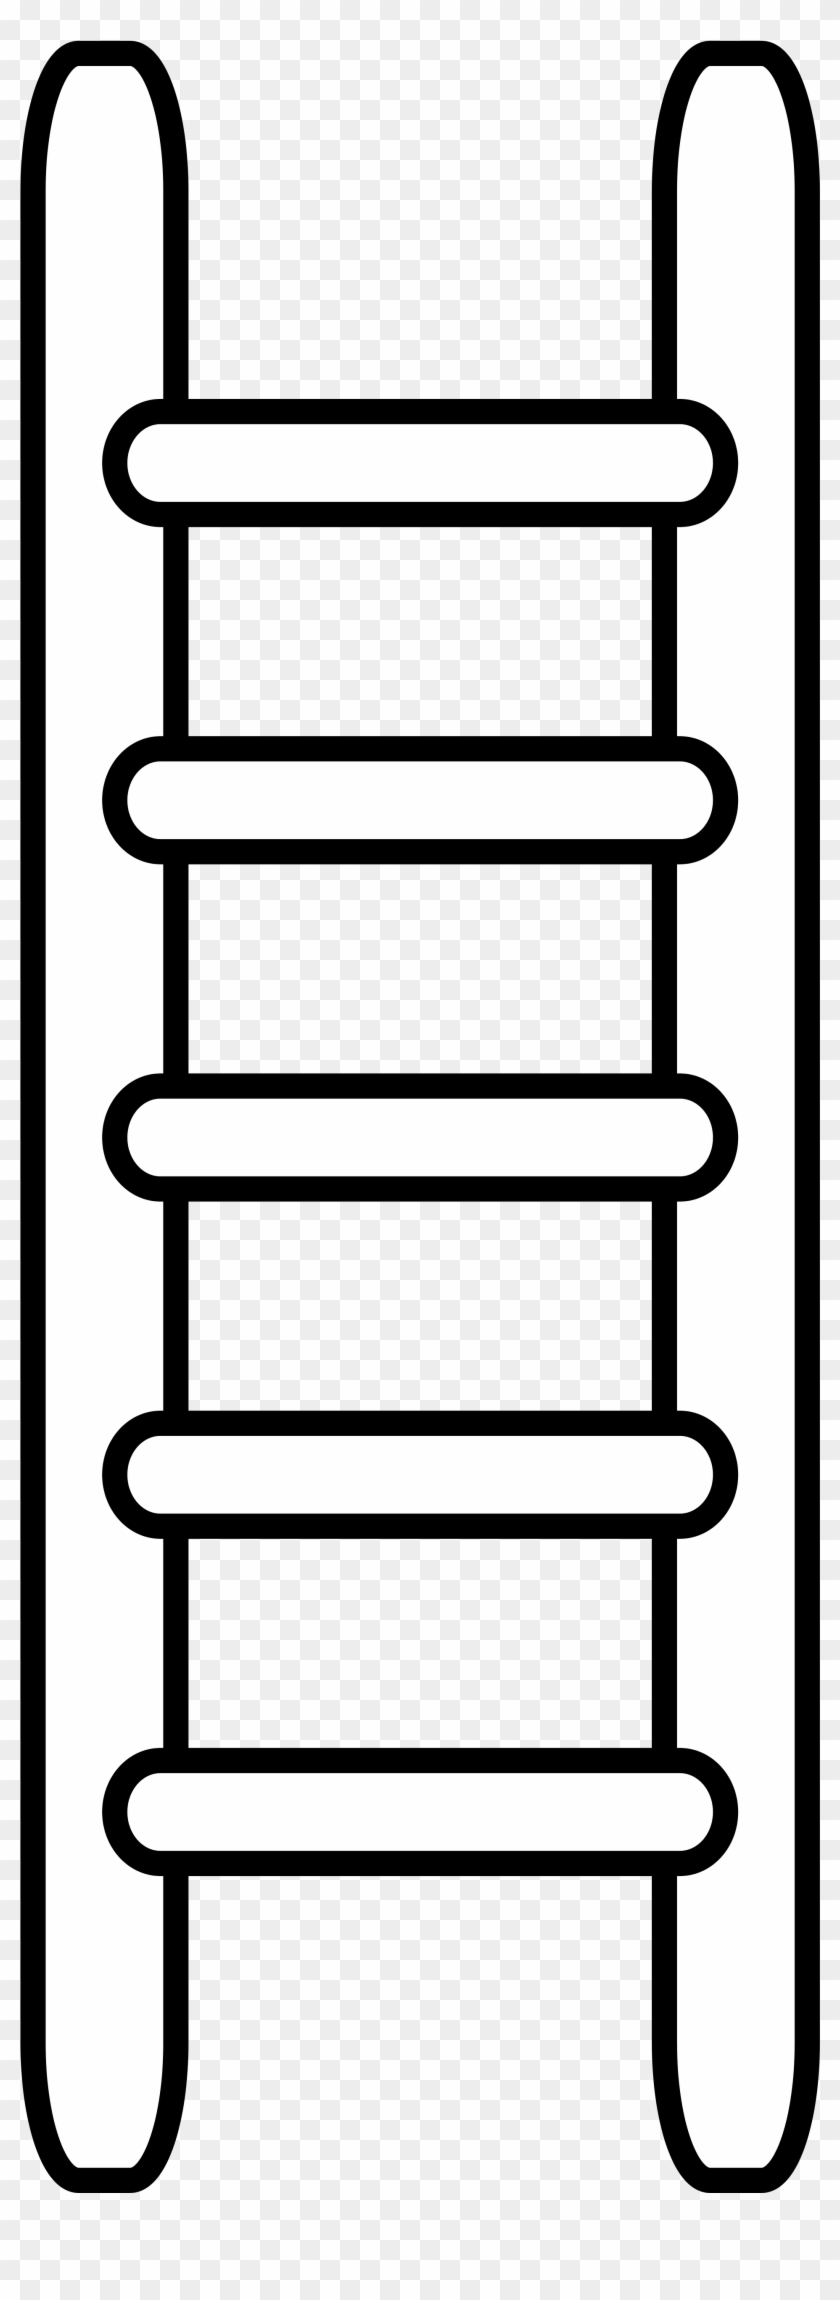 File H Raldique Meuble Echelle Wikimedia Commons - Ladder Clipart Black And White Png Transparent Png